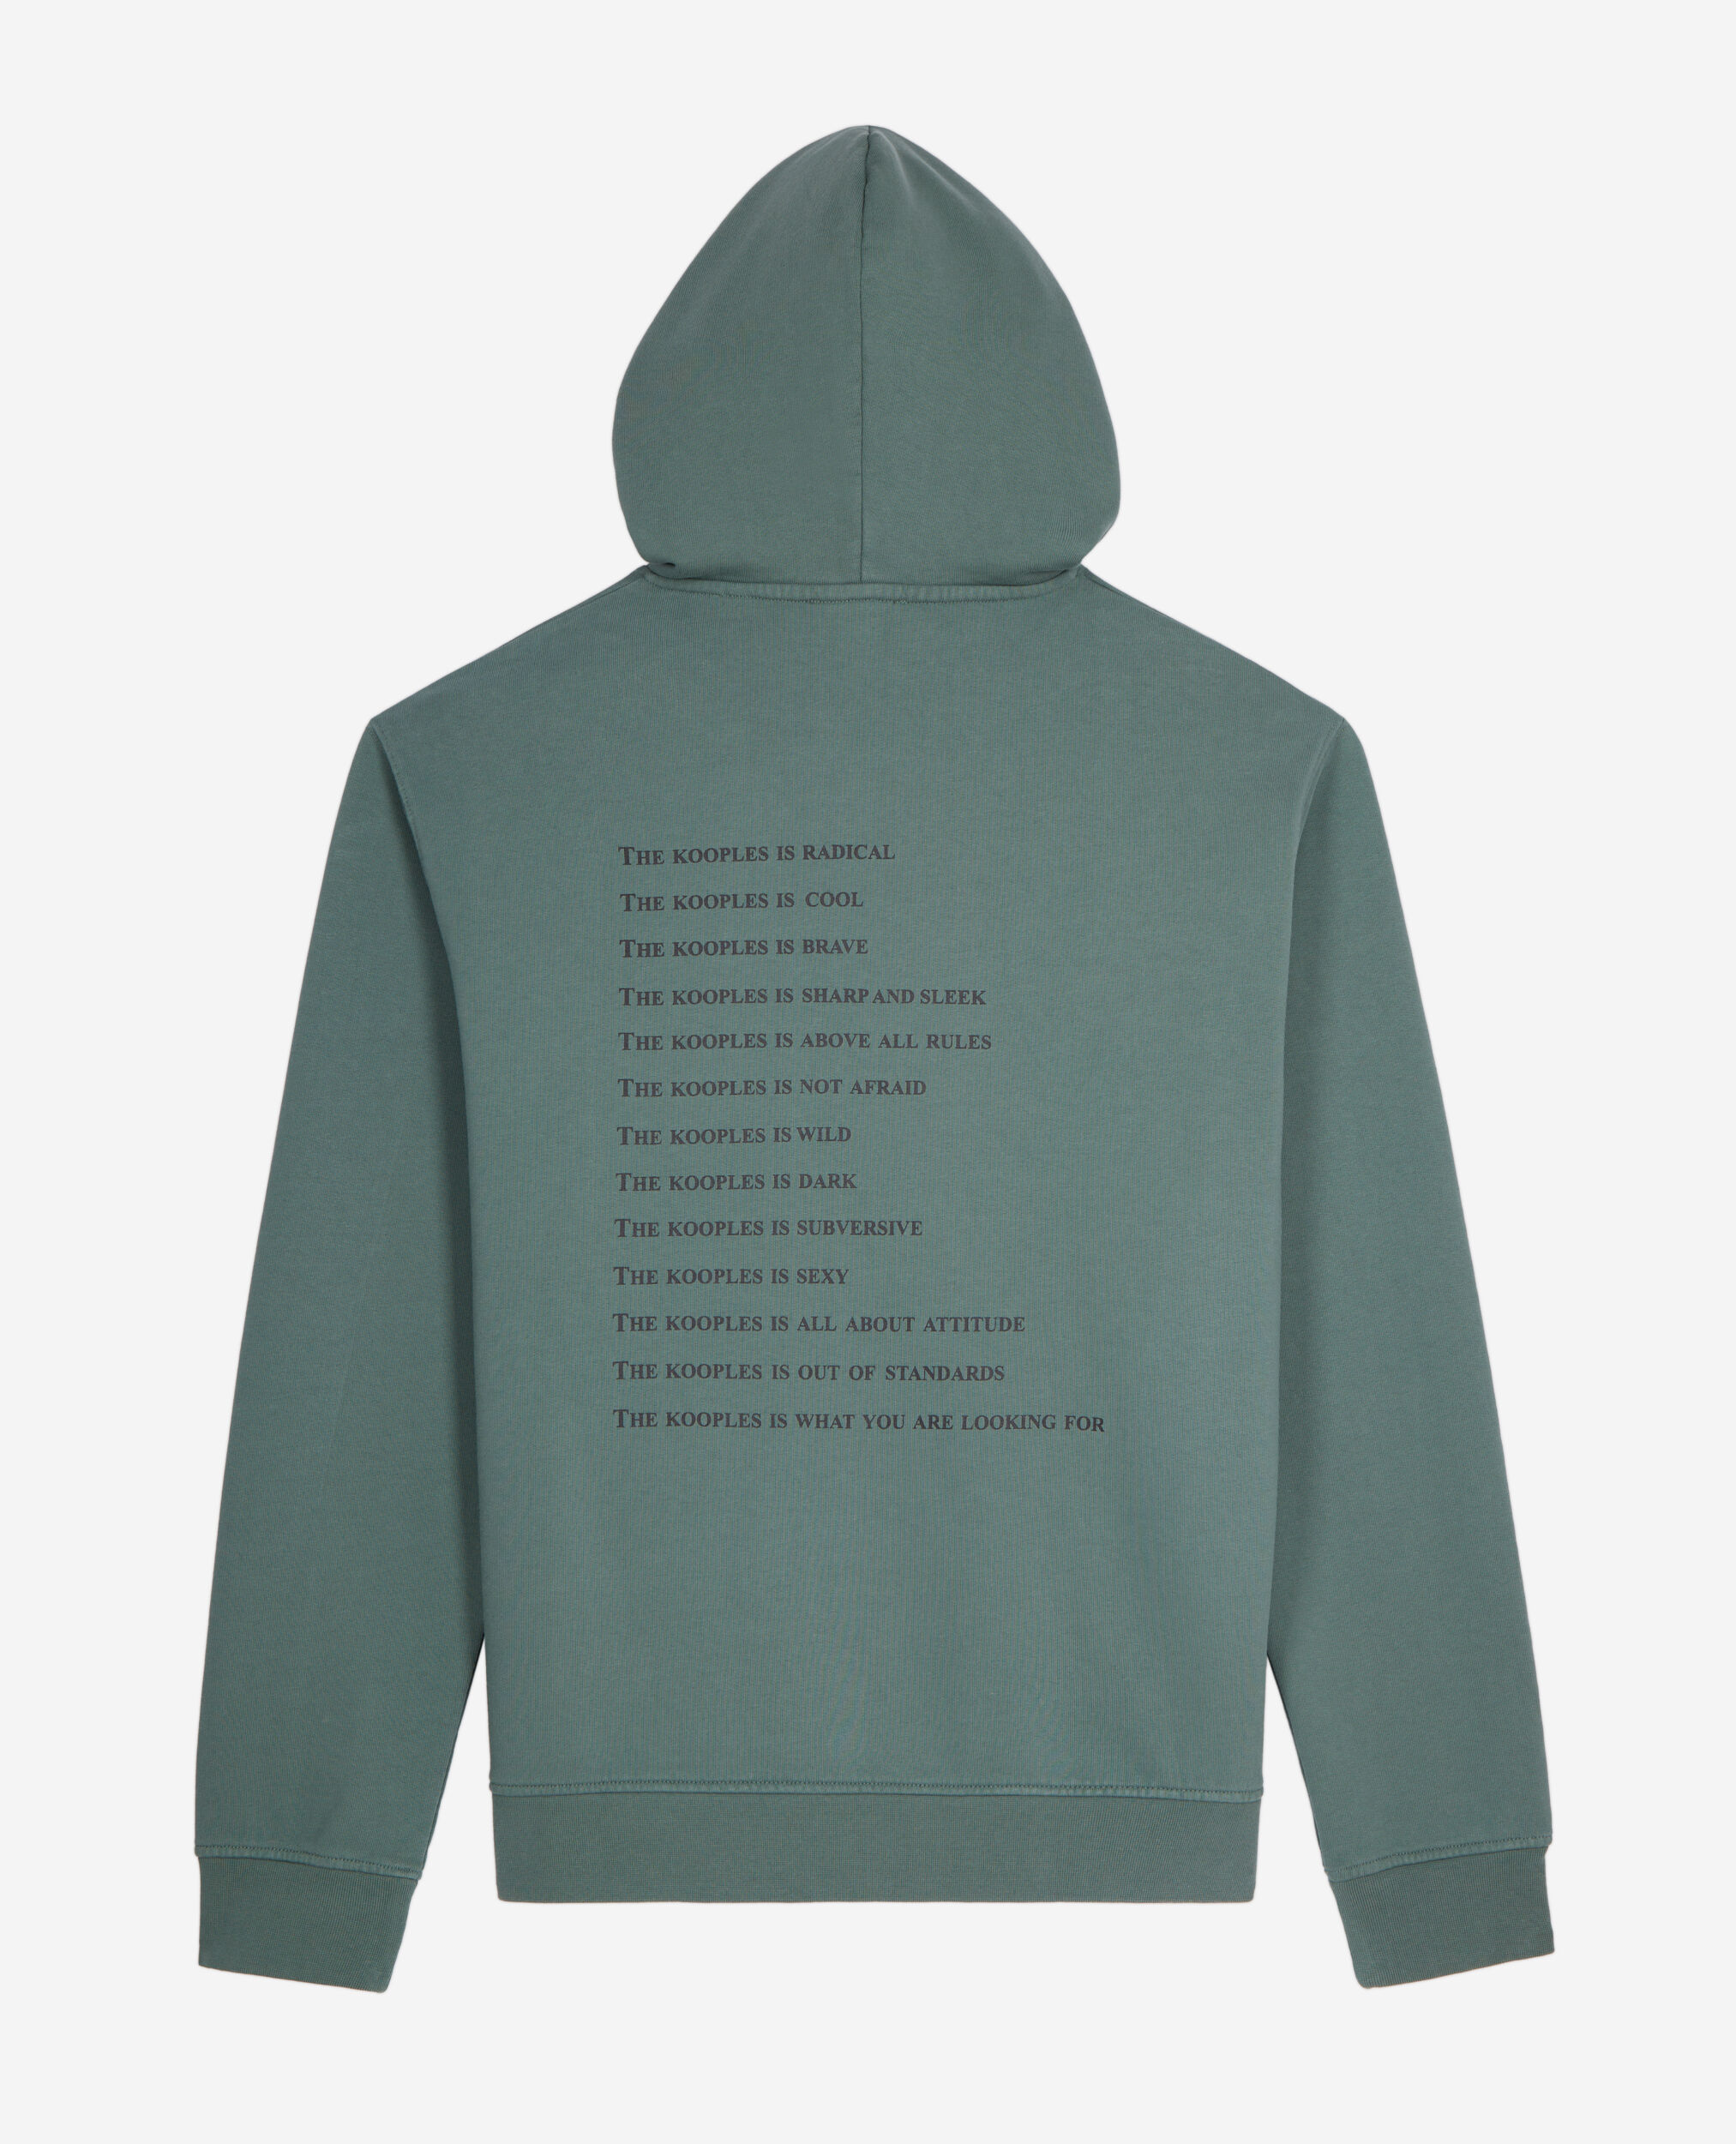 Sweatshirt à capuche What is vert, FOREST, hi-res image number null